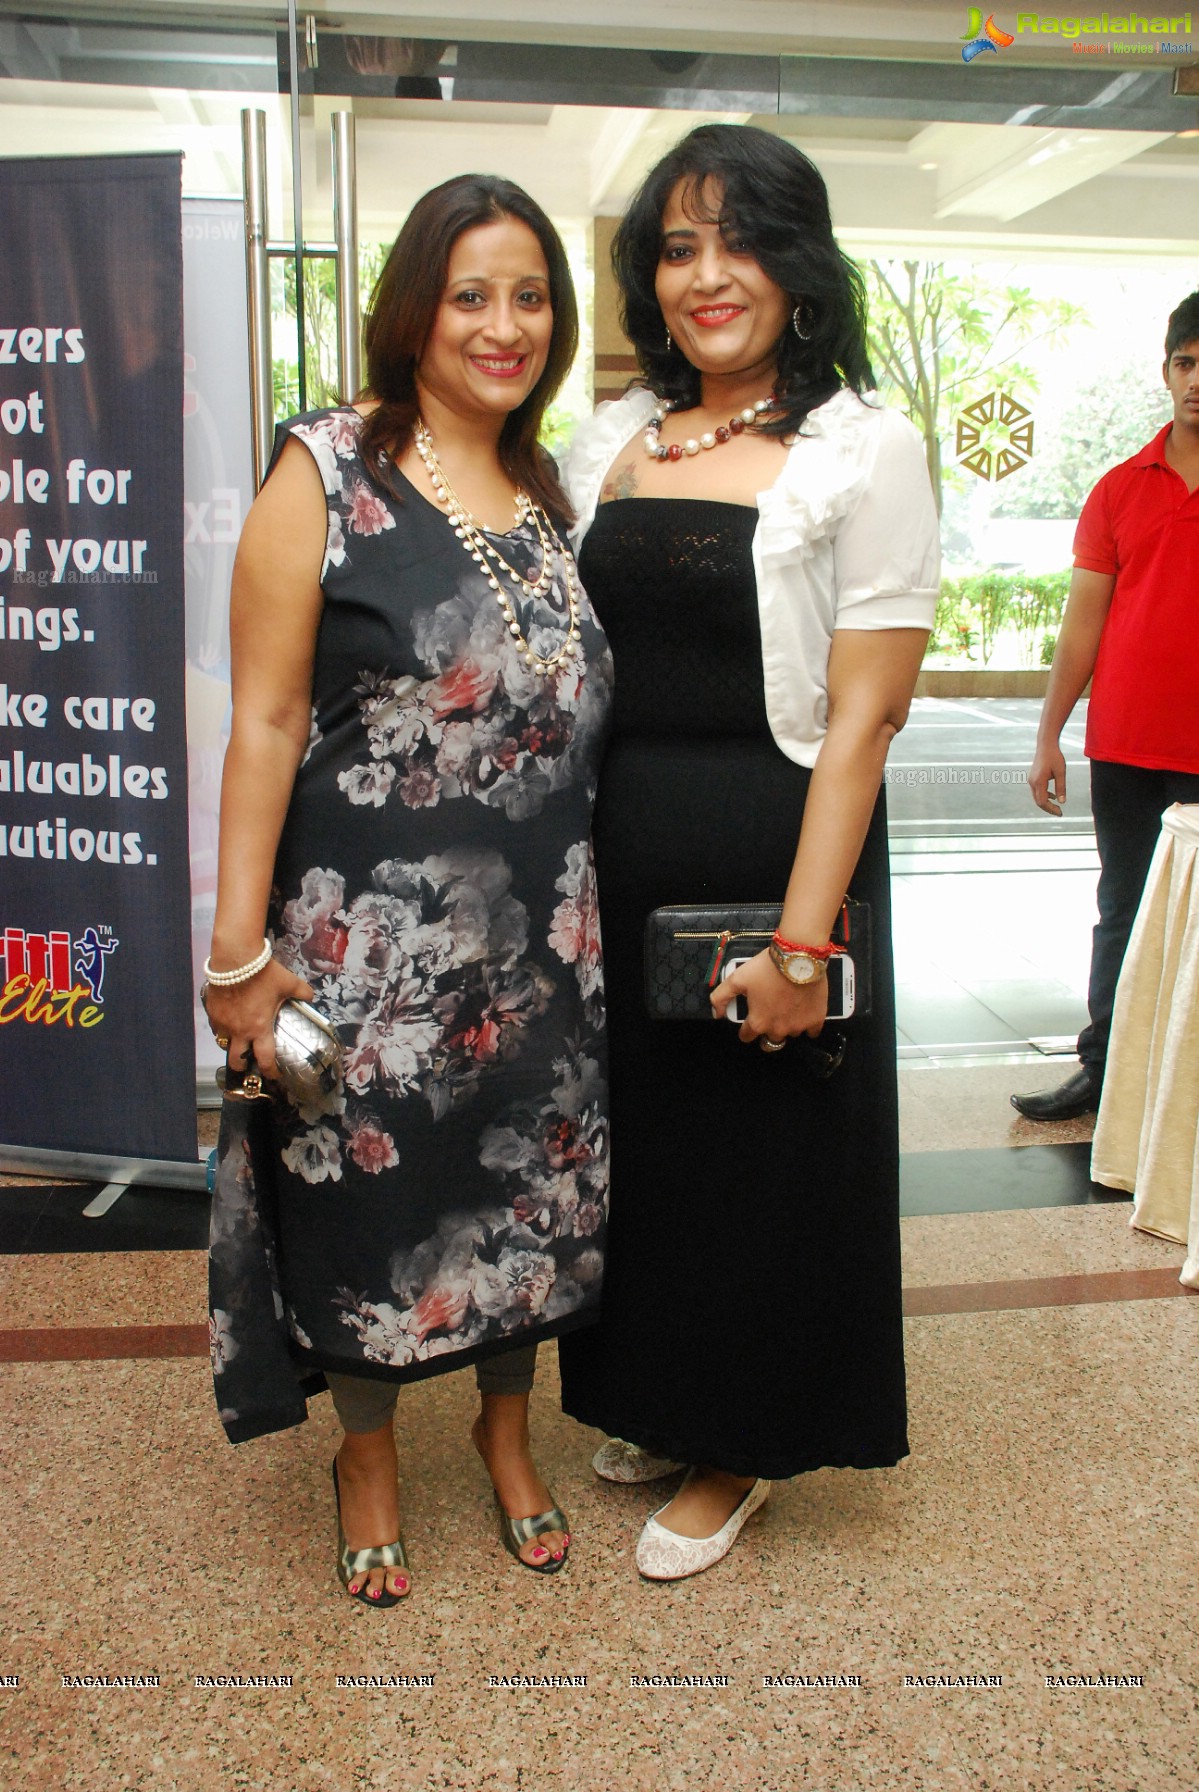 Akritti Elite Exhibition launched by Pooja Kiran